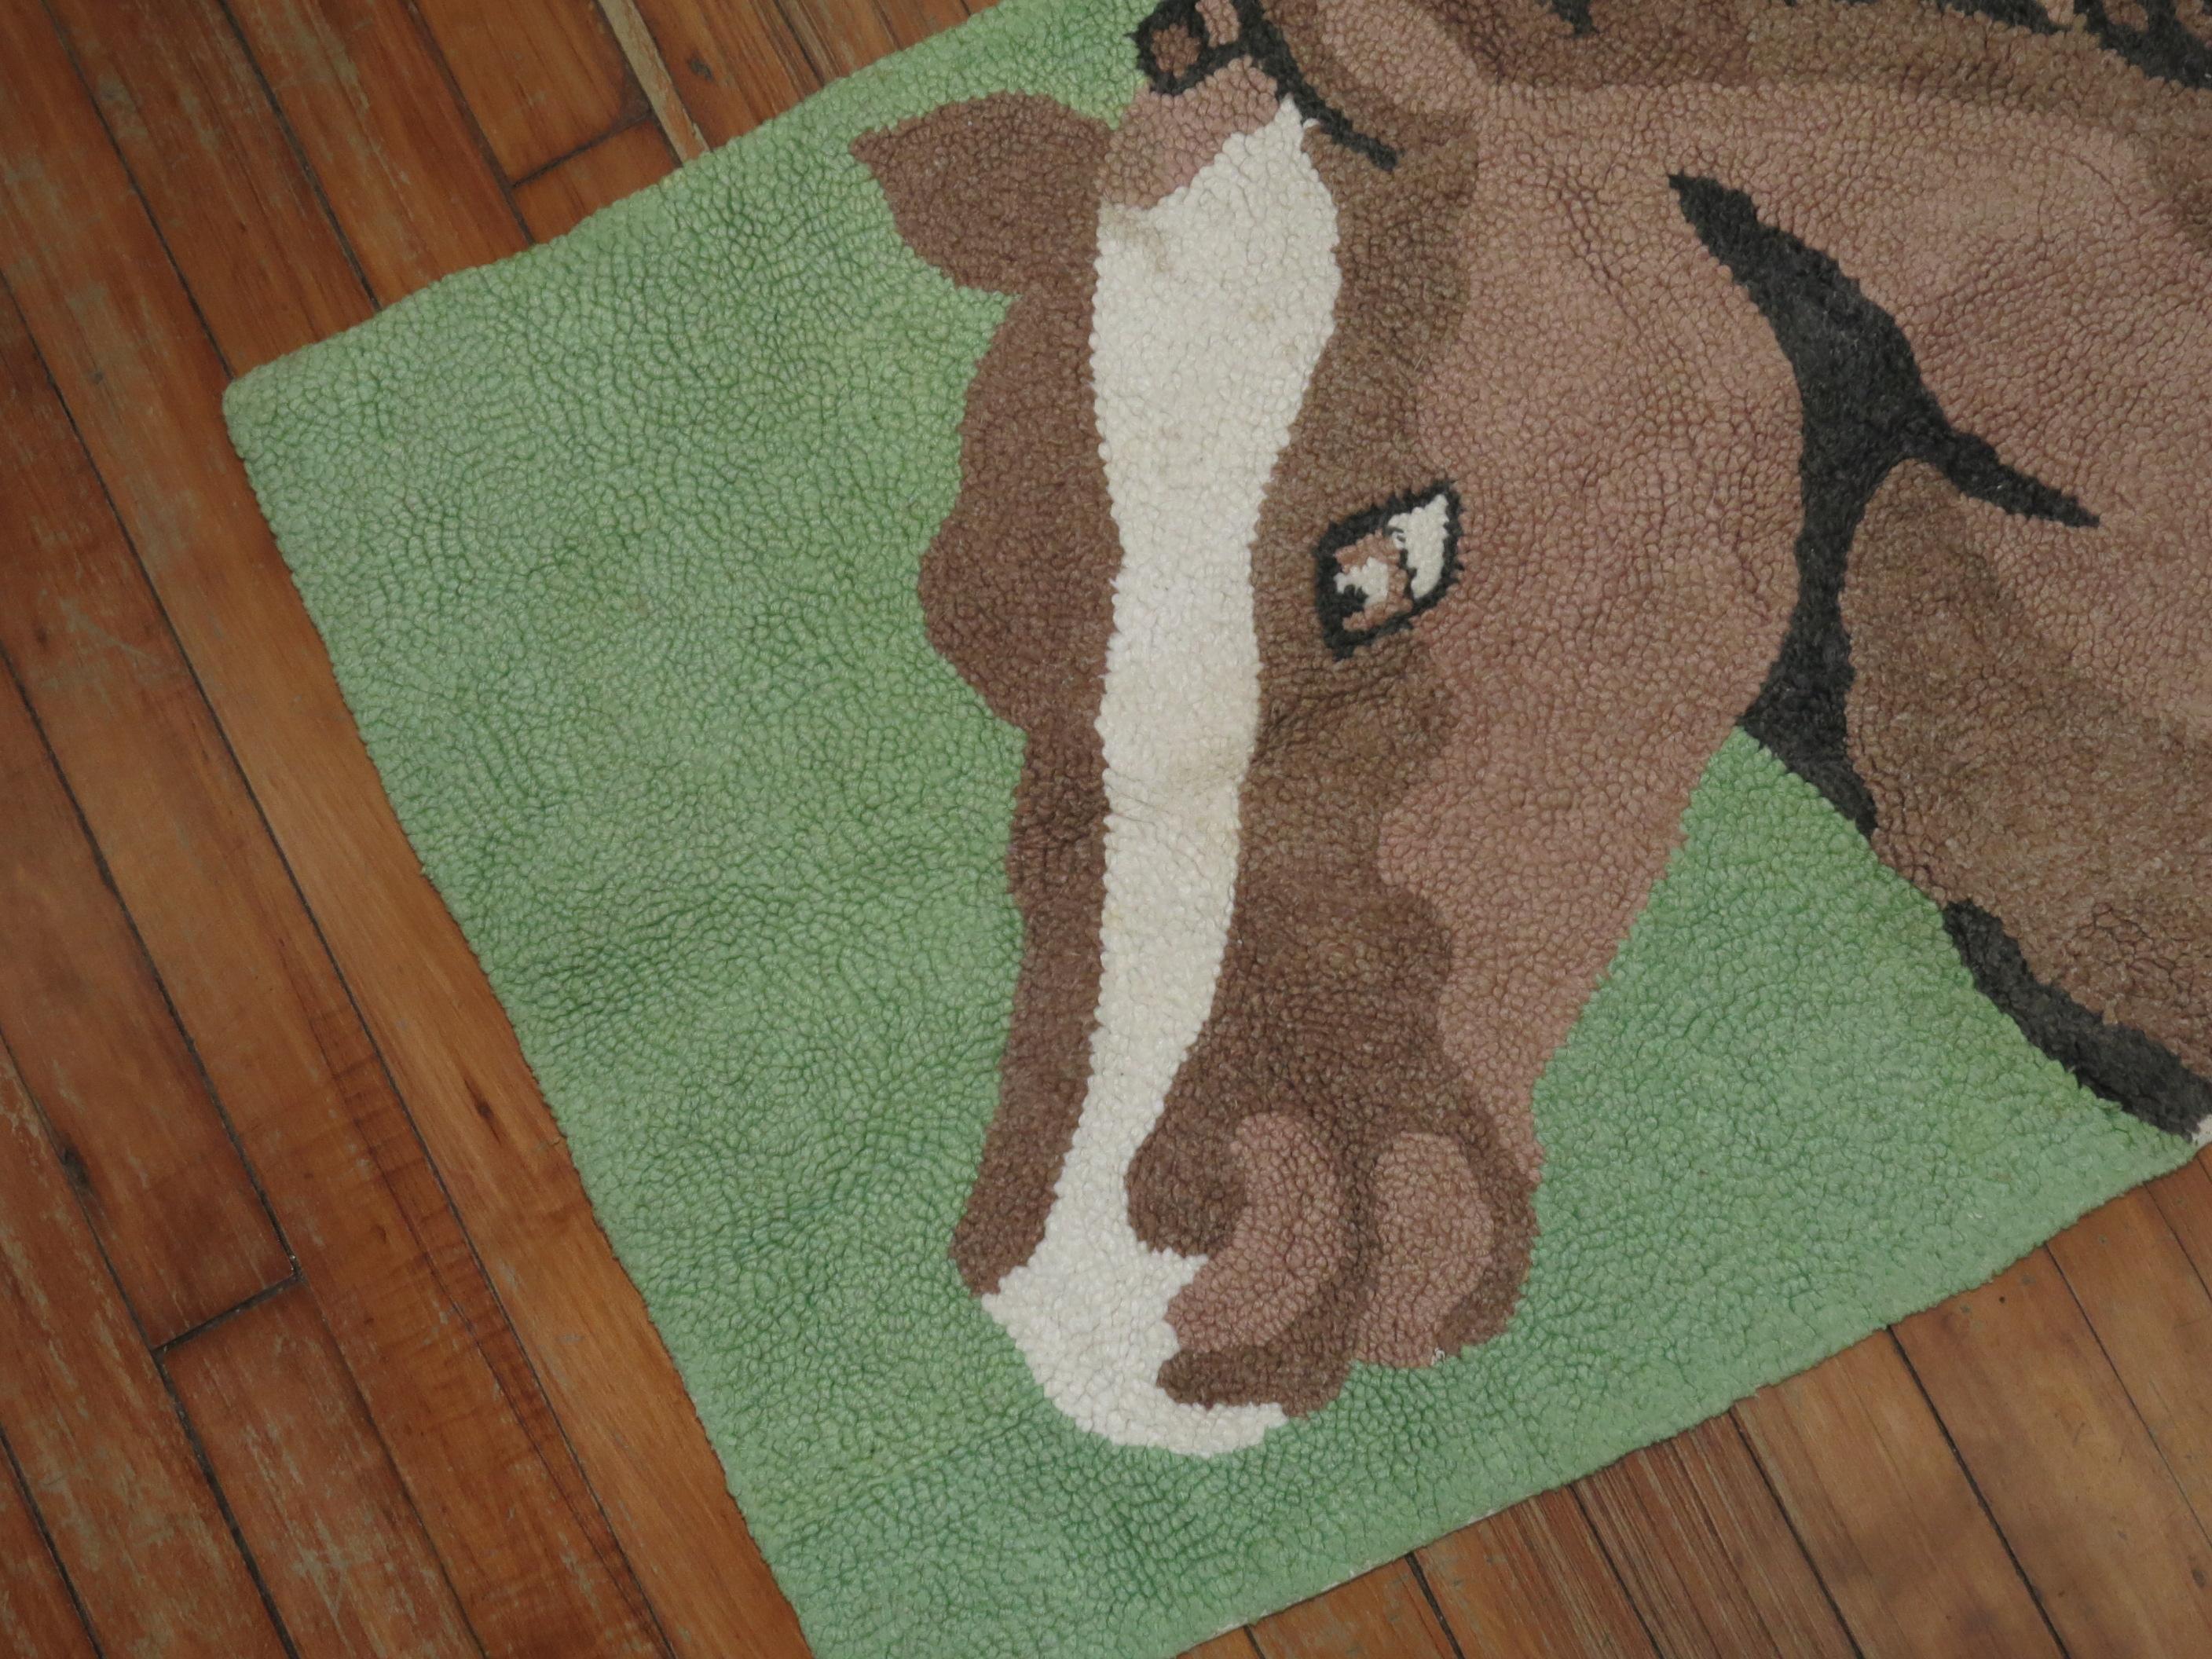 A handmade American hooked rug from the middle part of the 20th century depicting a horse on a mint green background. Condition is really nice. No stains, no tears, has been professionally cleaned.